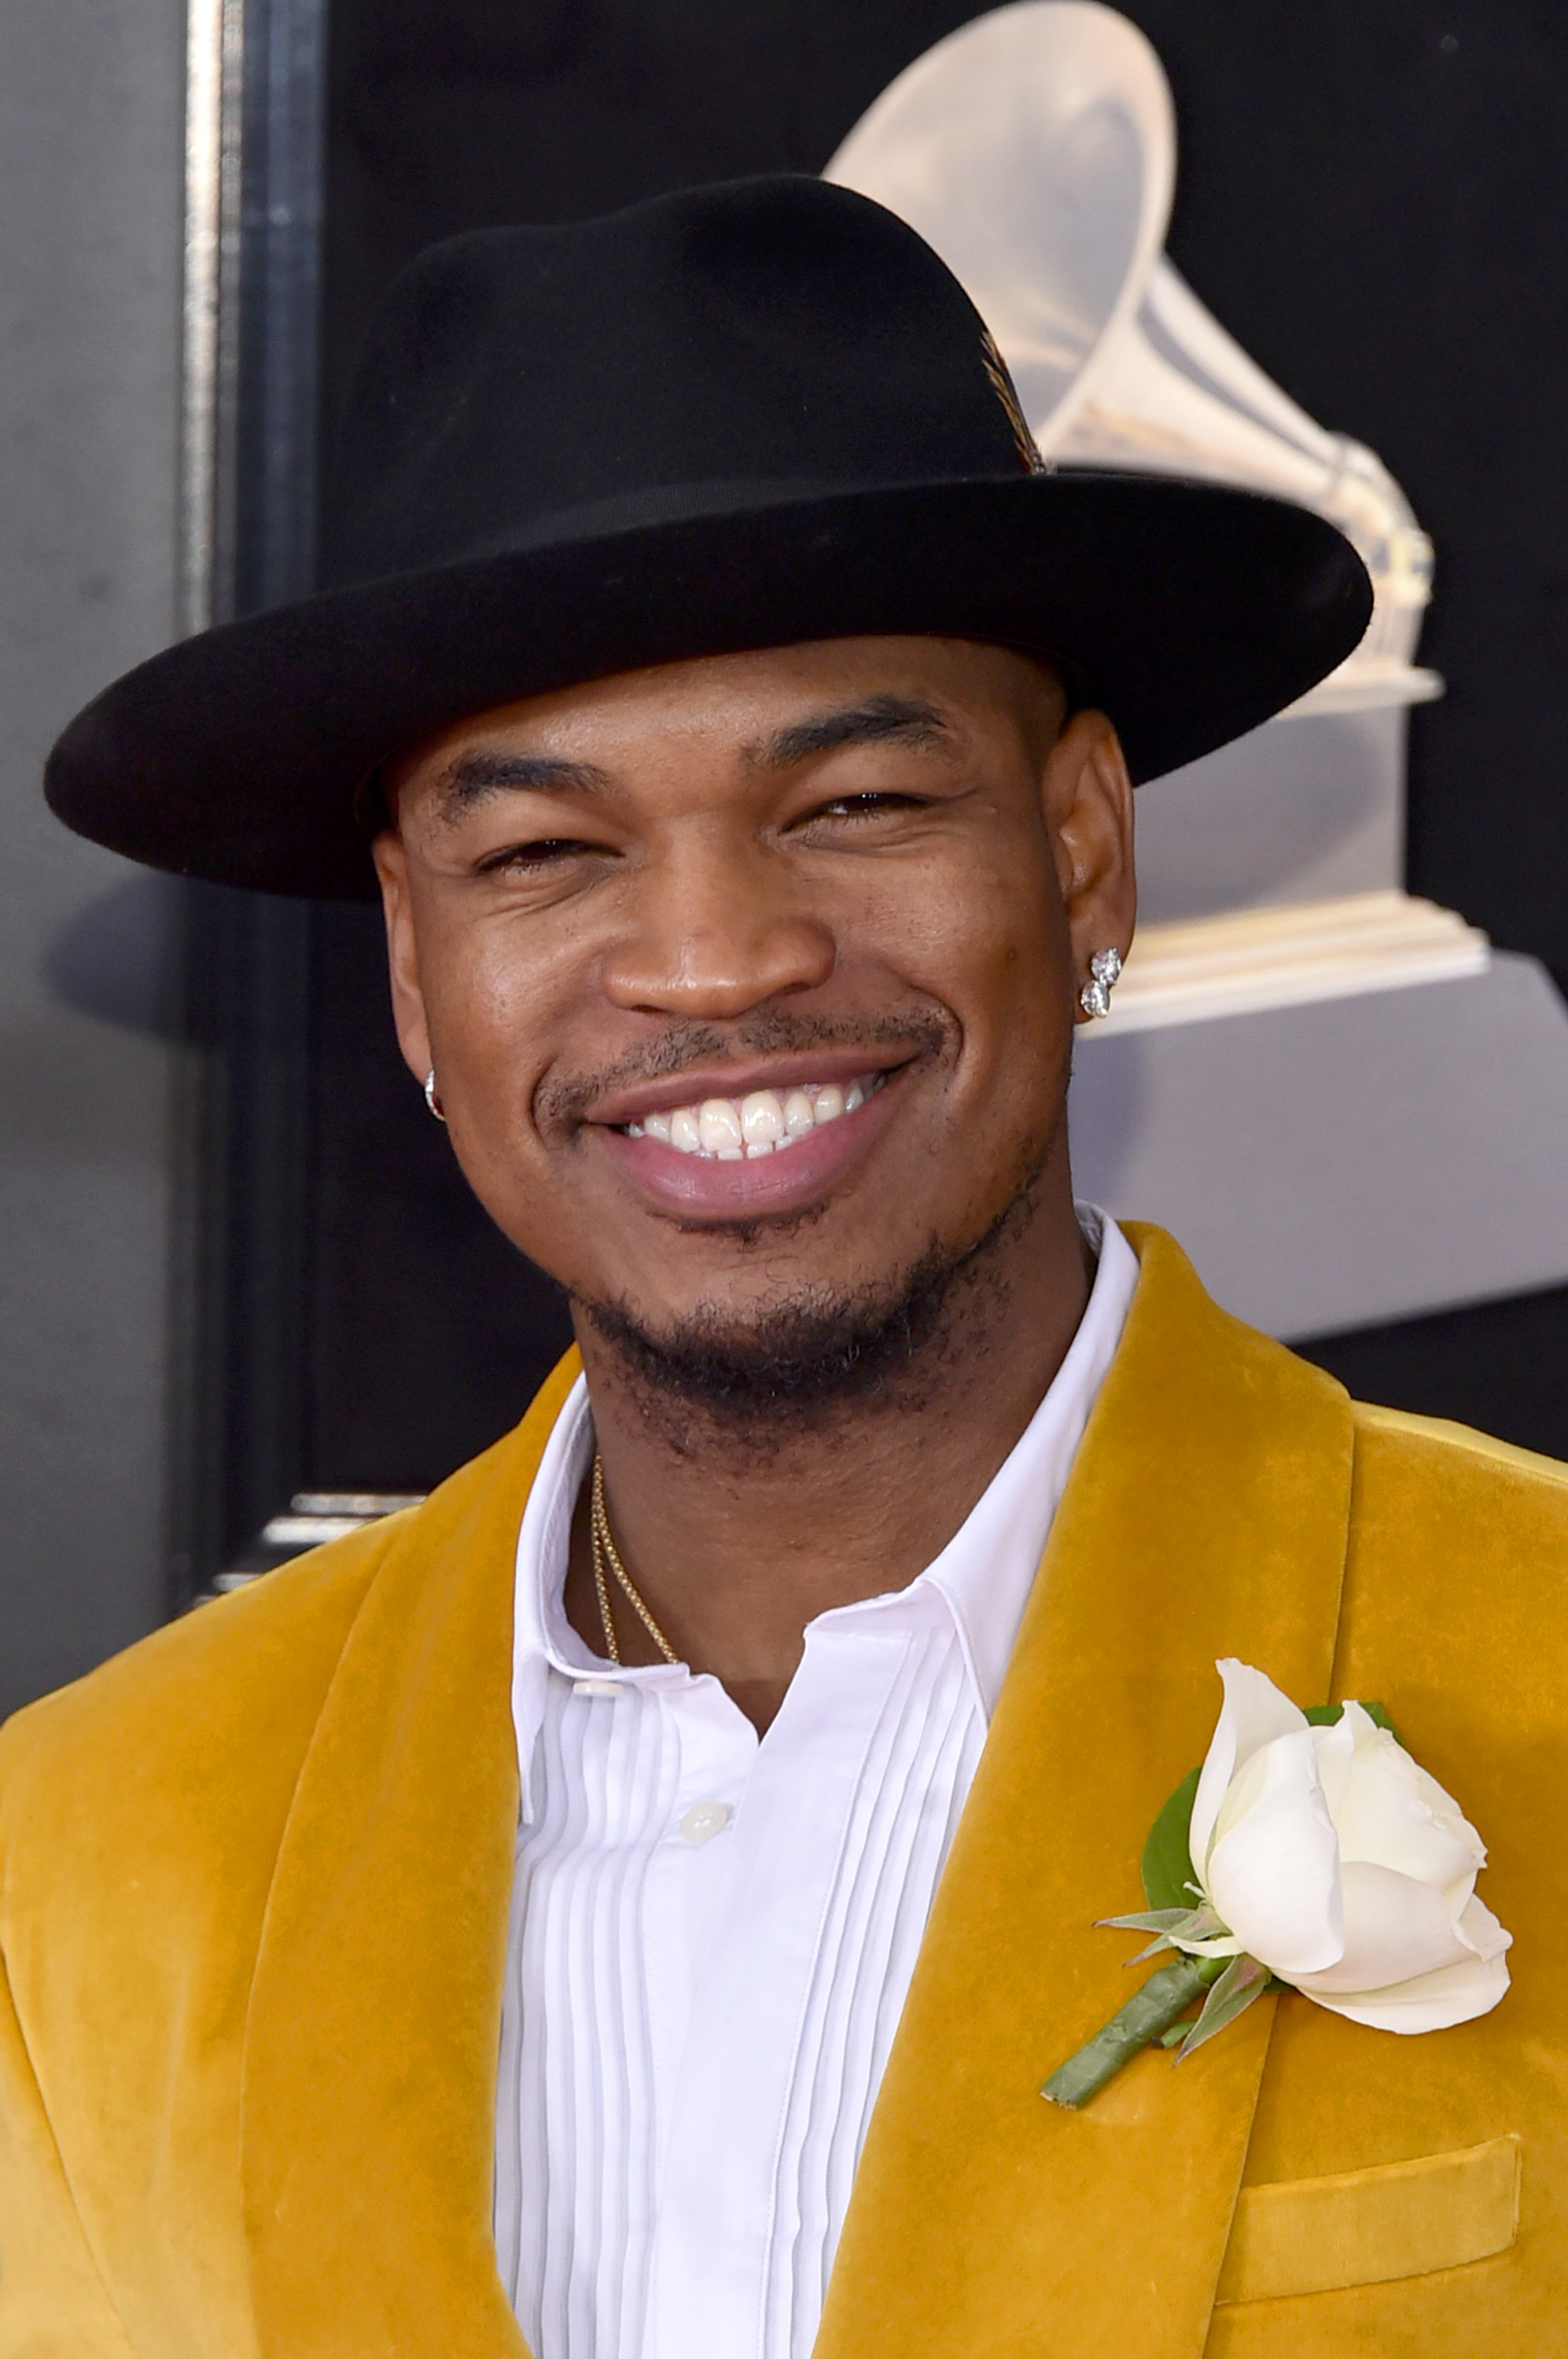 Recording artist Ne-Yo attends the 60th Annual GRAMMY Awards at Madison Square Garden on January 28, 2018 in New York City.